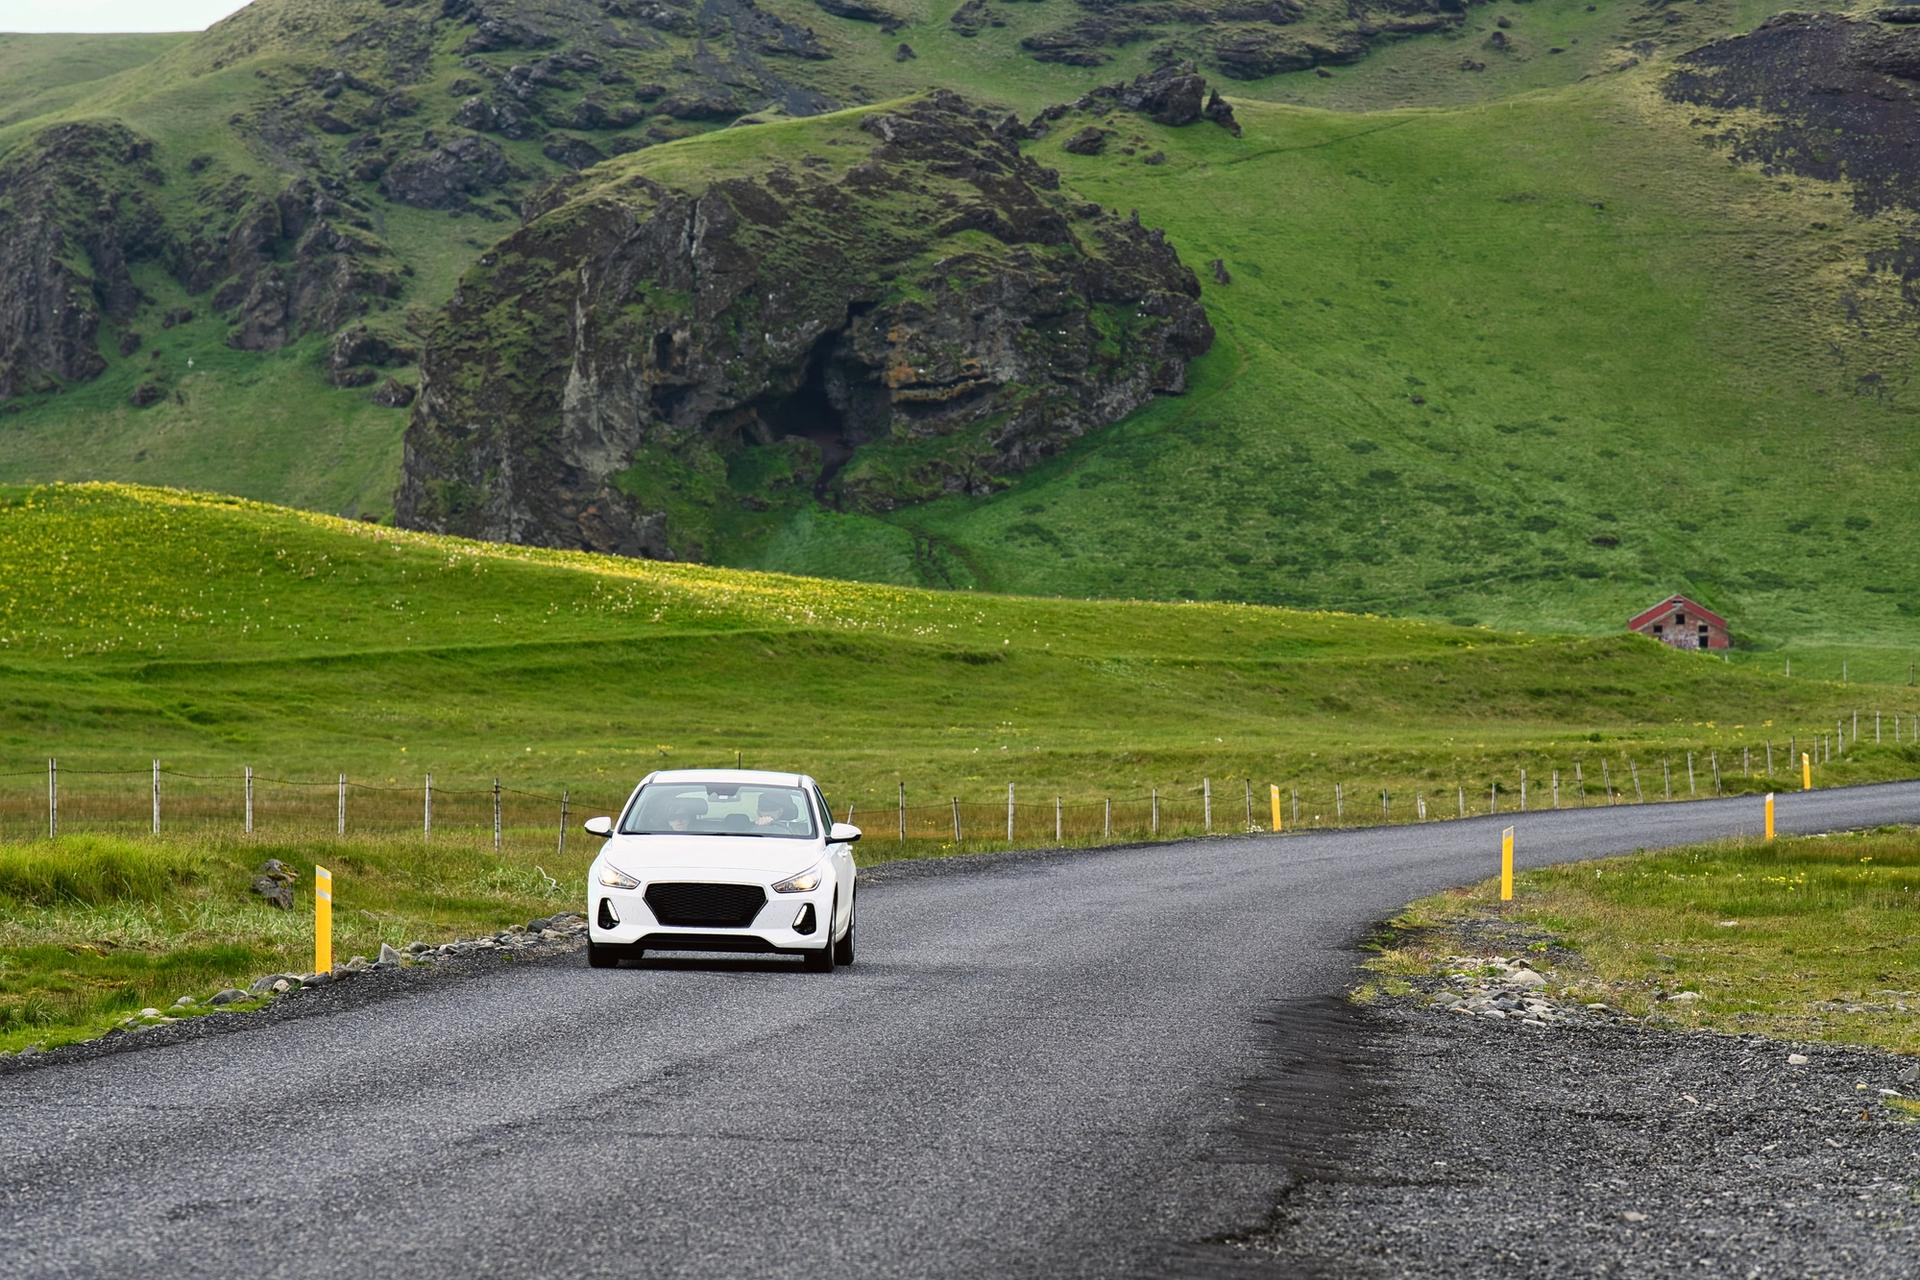 White cars driving on asphalt roads in the green, mountainous Icelandic countryside during summer.